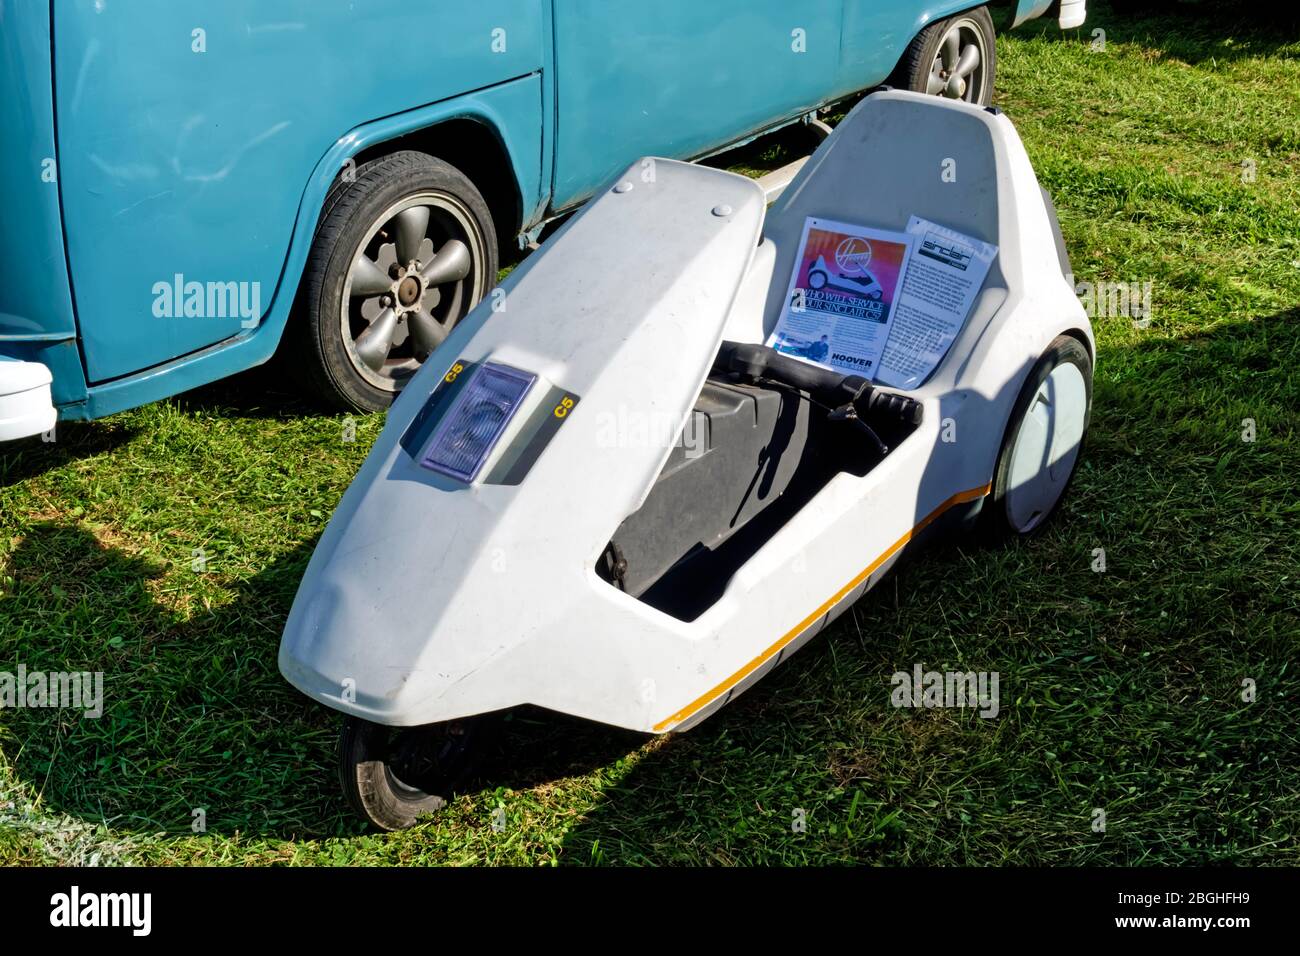 Westbury, Wiltshire / UK - September 1 2019: A 1985 Sinclair C5, small one-person battery electric velomobile, invented by Sir Clive Sinclair Stock Photo